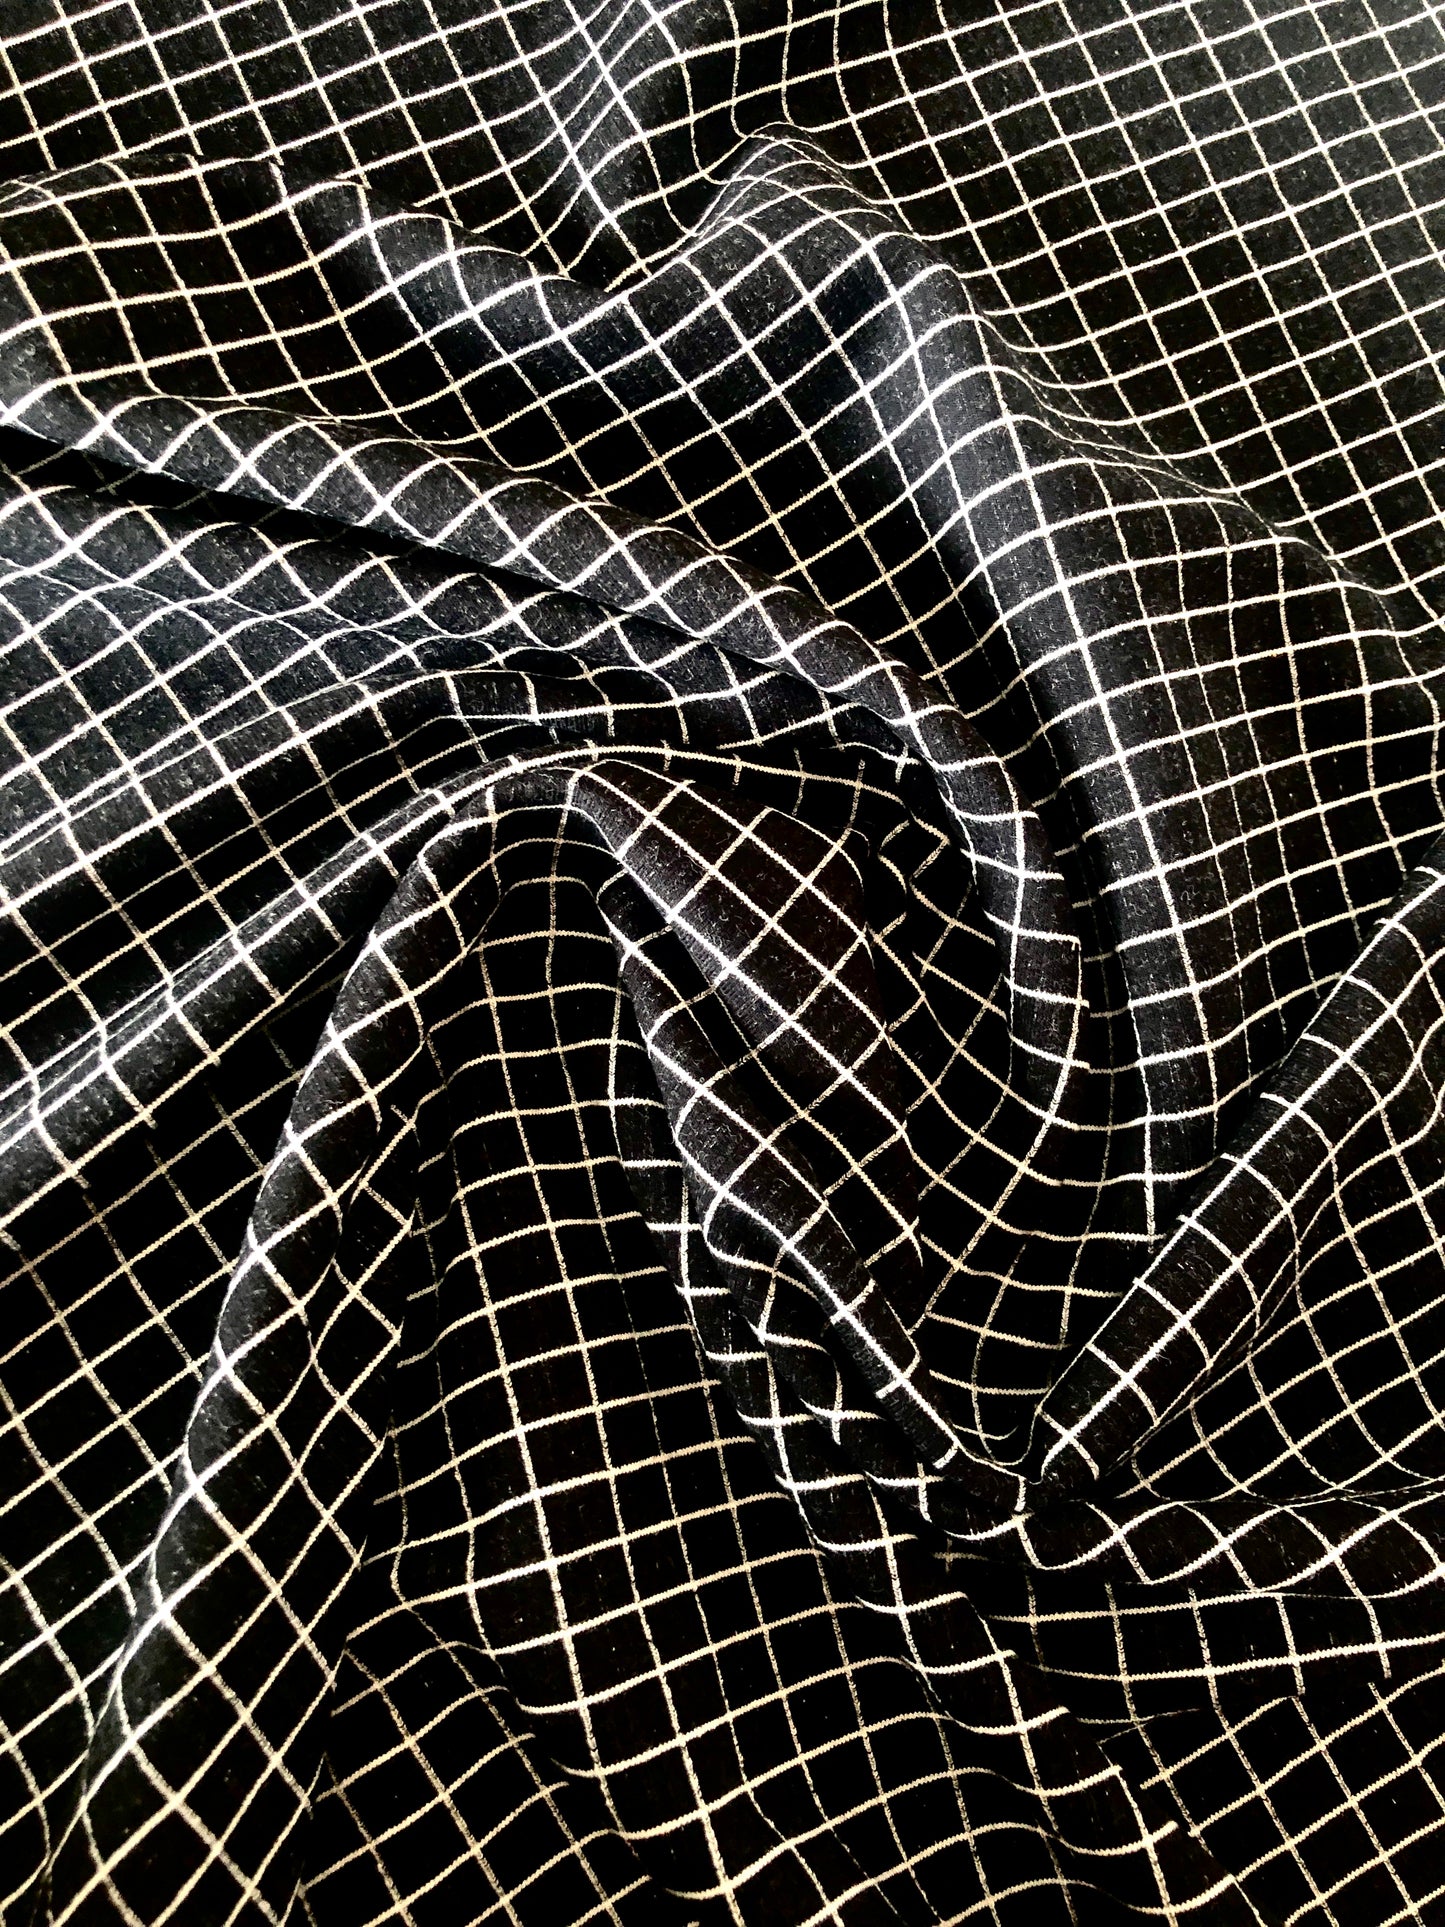 Checkerboard Cotton Jersey - Black - REMNANT - 3m x175cm - FLAW